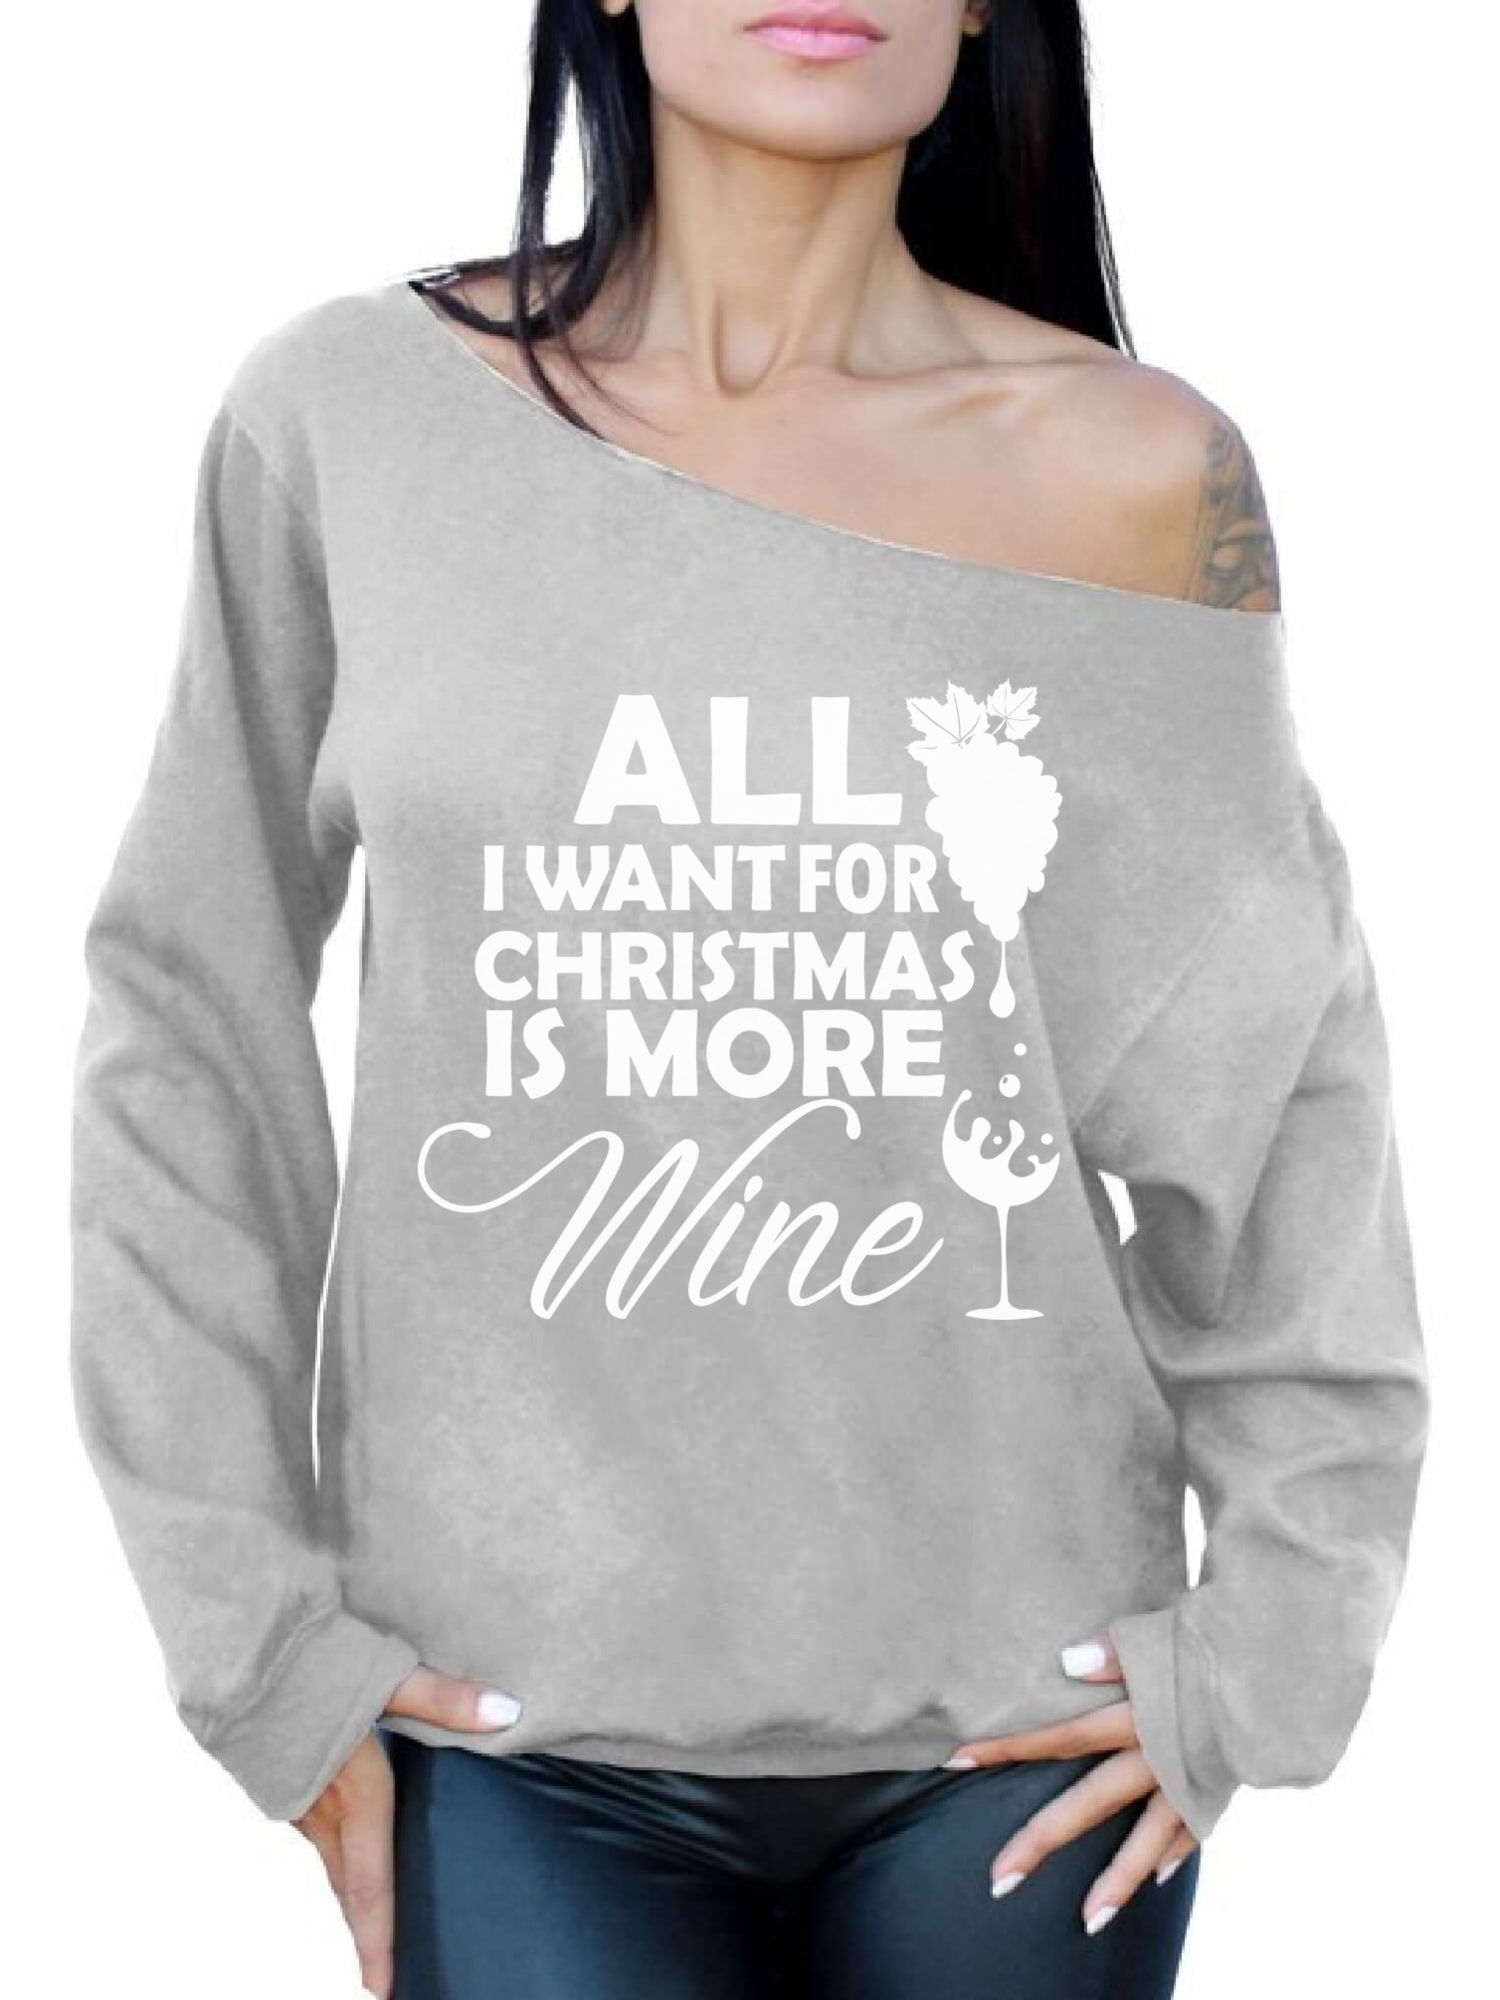 Awkward Styles All I Want for Christmas Is More Wine Off the Shoulder Sweatshirt More Wine Off the Shoulder Top Oversized Sweatshirt Wine Christmas Sweatshirt for Women Wine Christmas Sweater - image 1 of 4